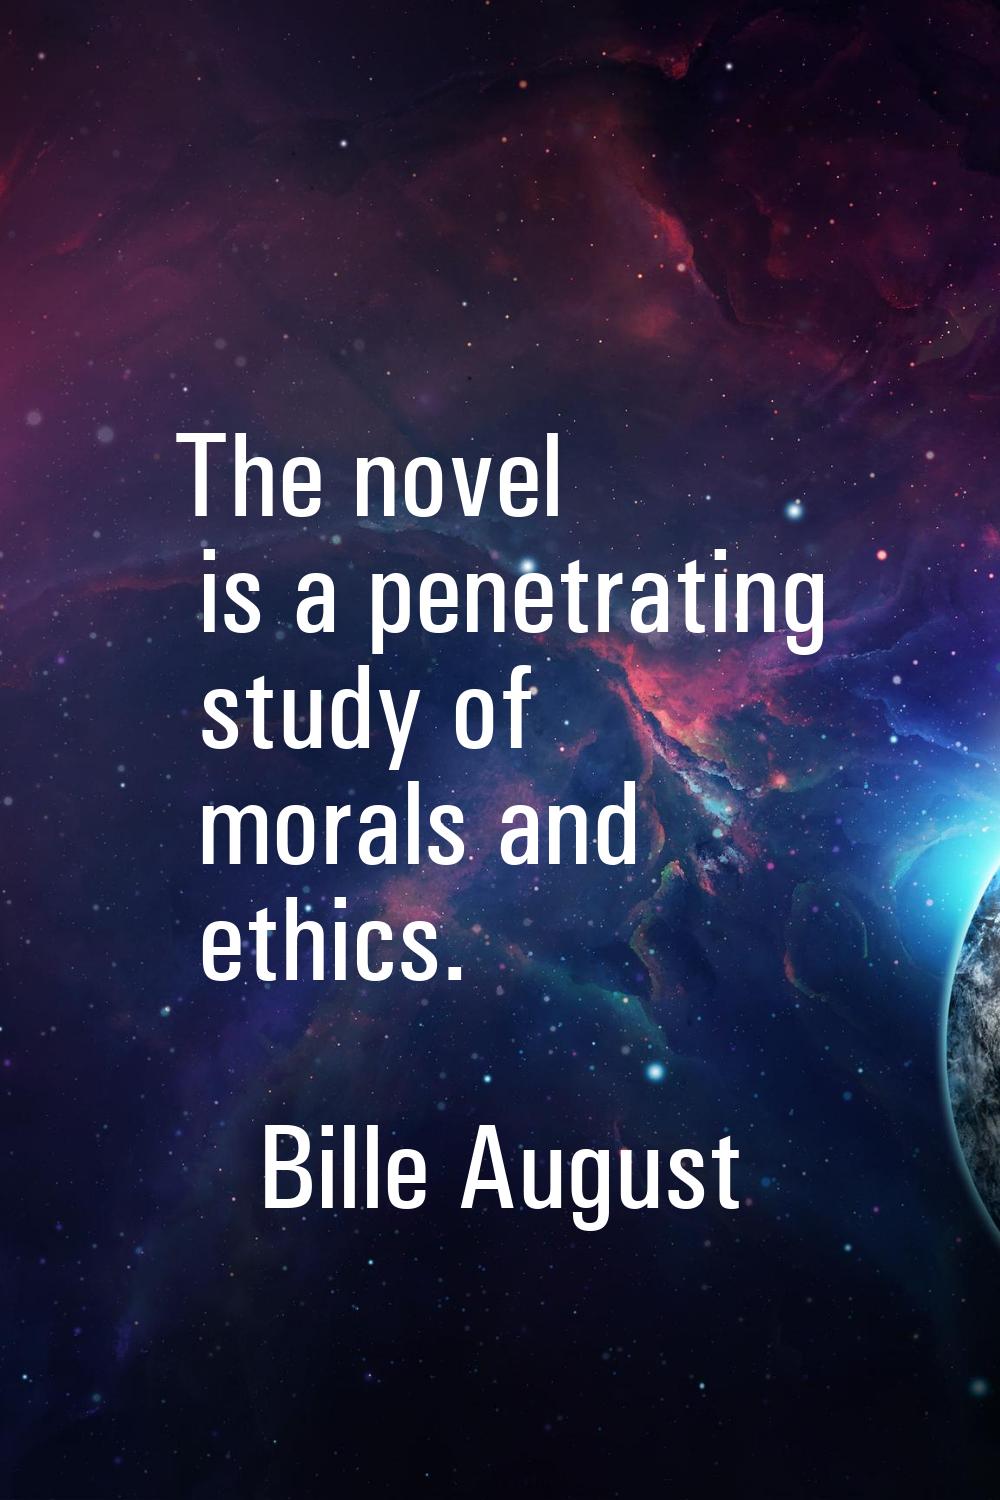 The novel is a penetrating study of morals and ethics.